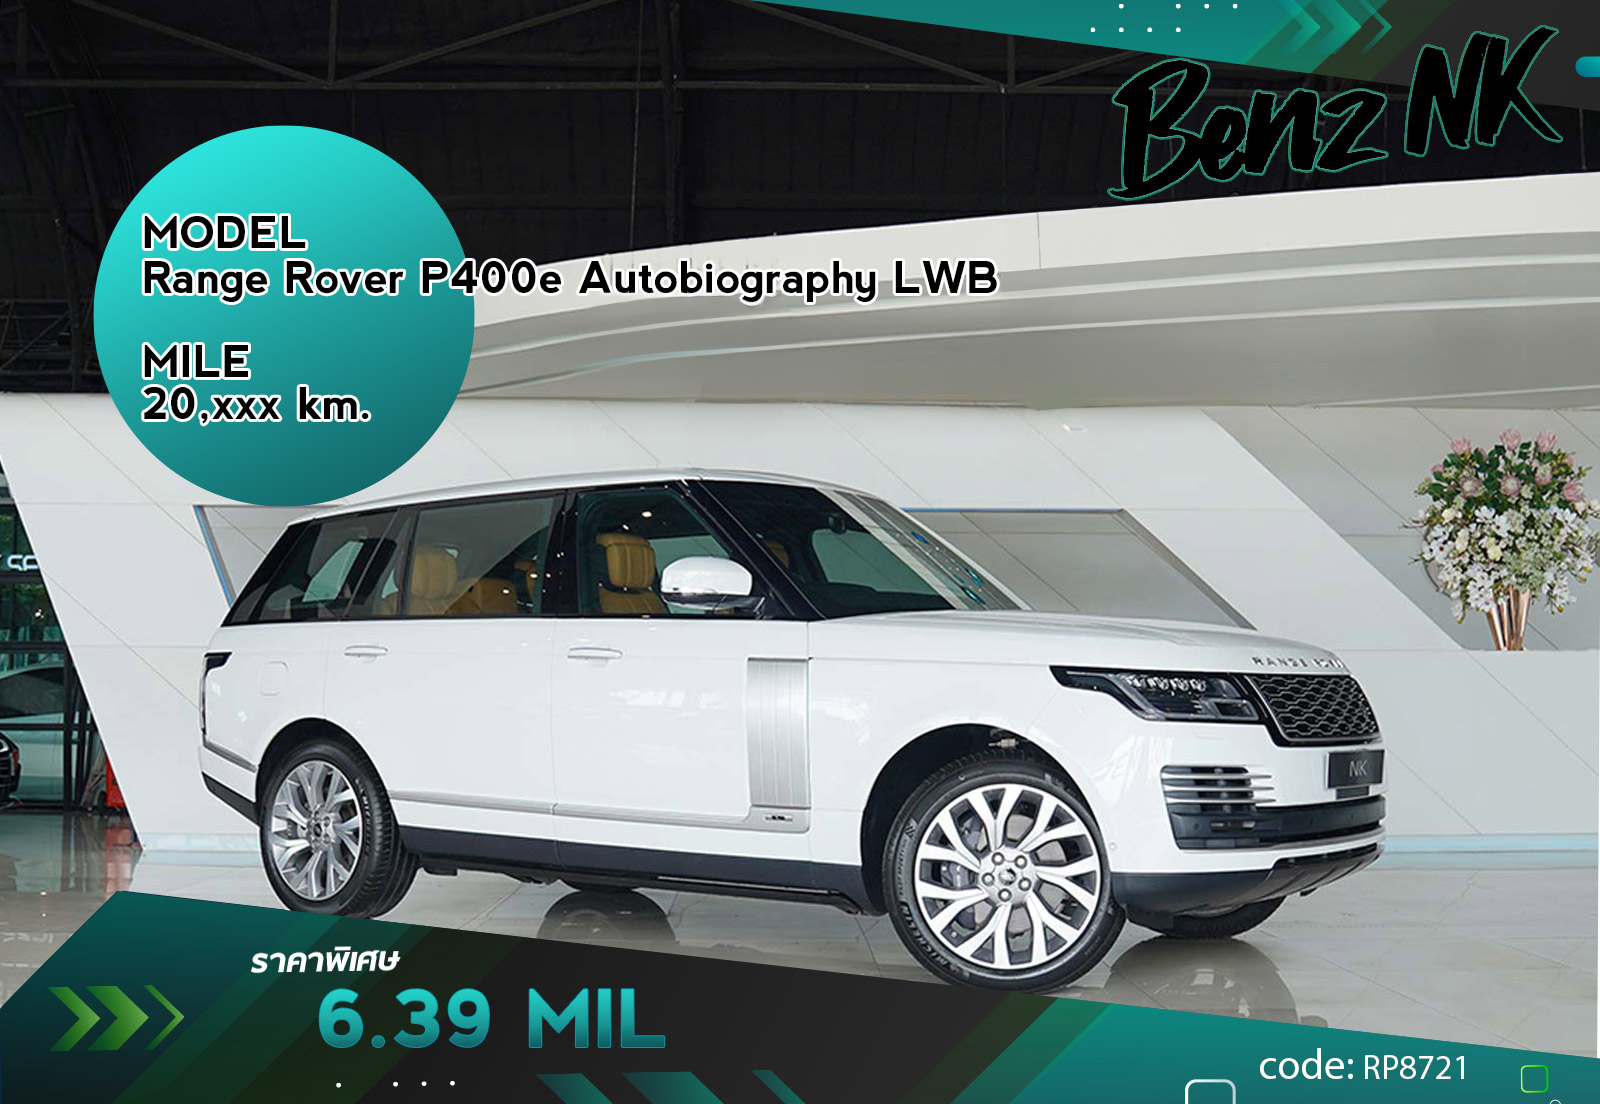 Range Rover P400e Autobiography LWB Other Brand